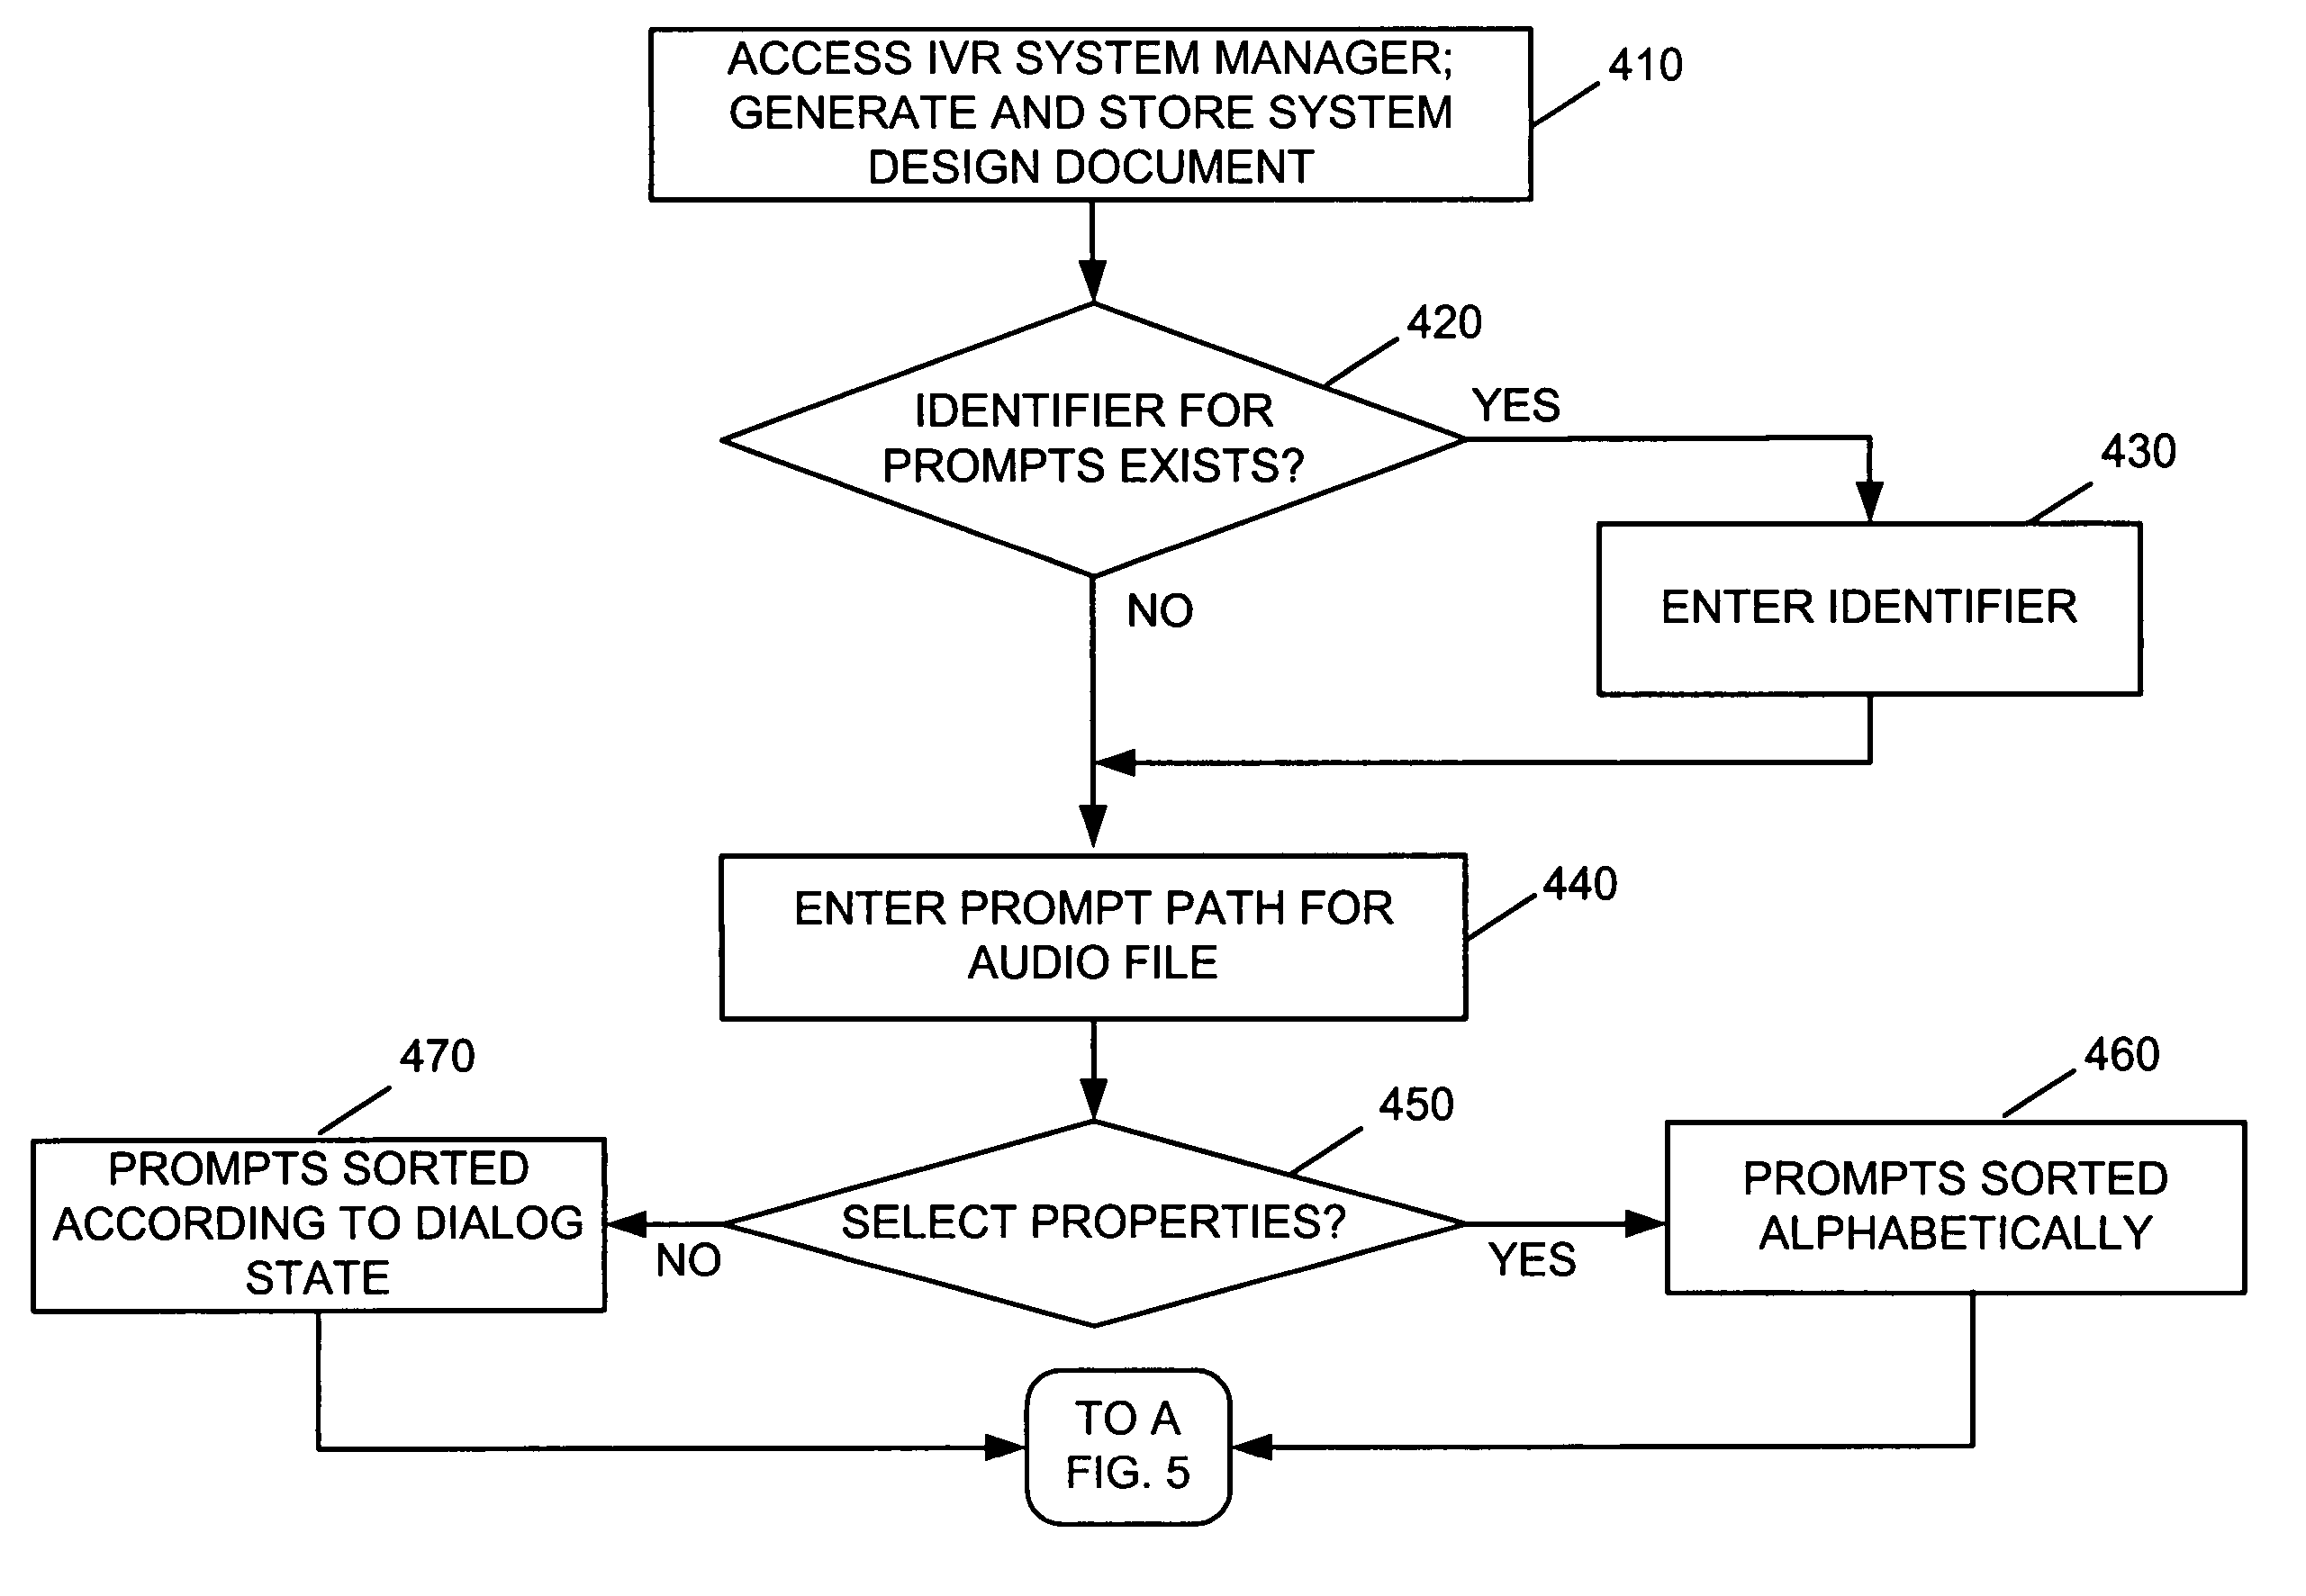 Systems and methods for generating and testing interactive voice response applications